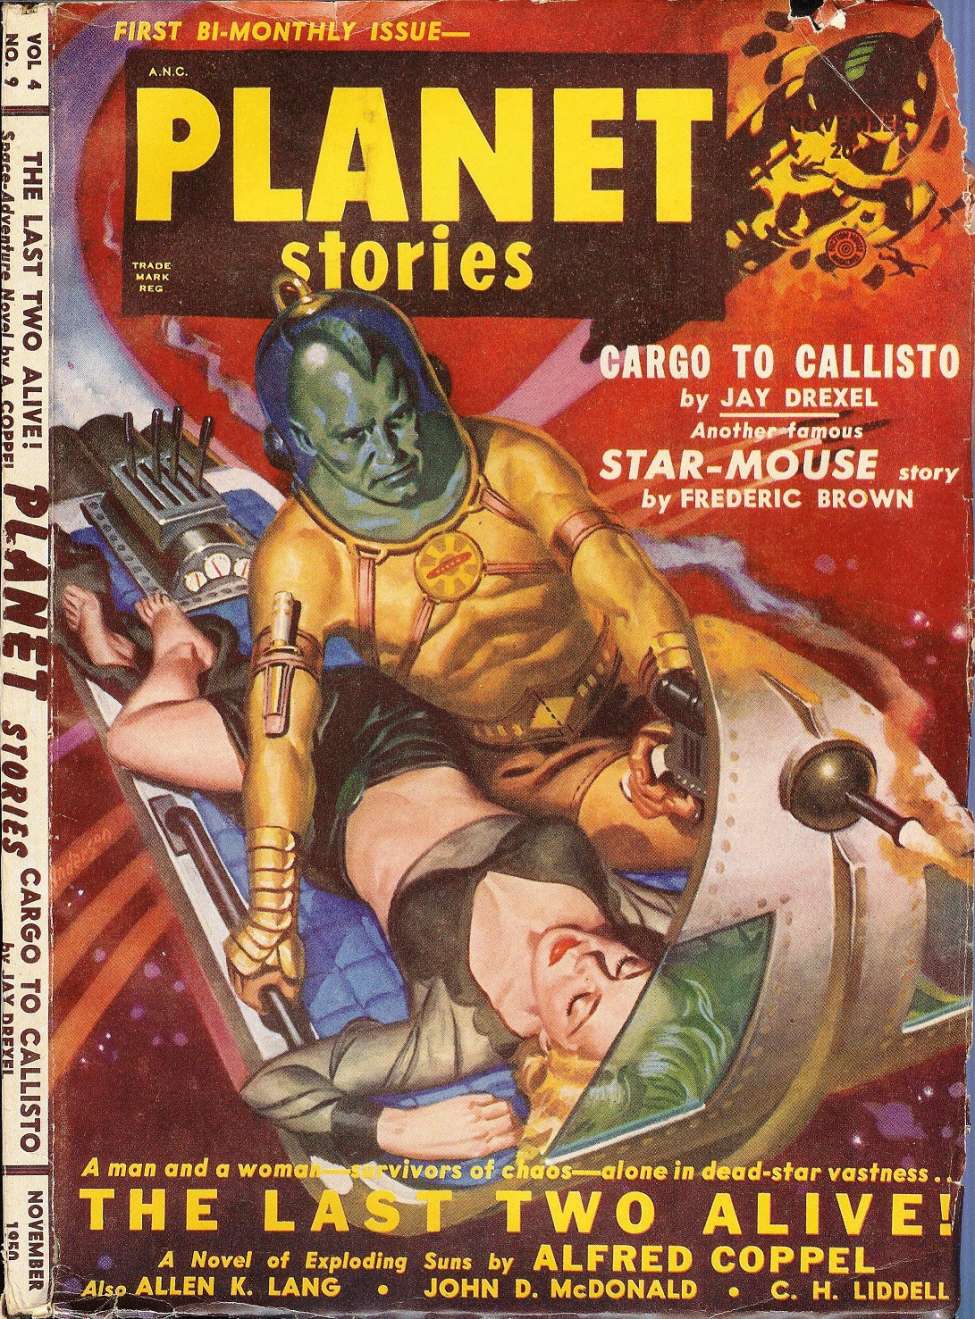 Comic Book Cover For Planet Stories v4 9 - The Last Two Alive! - Alfred Coppel, Jr.